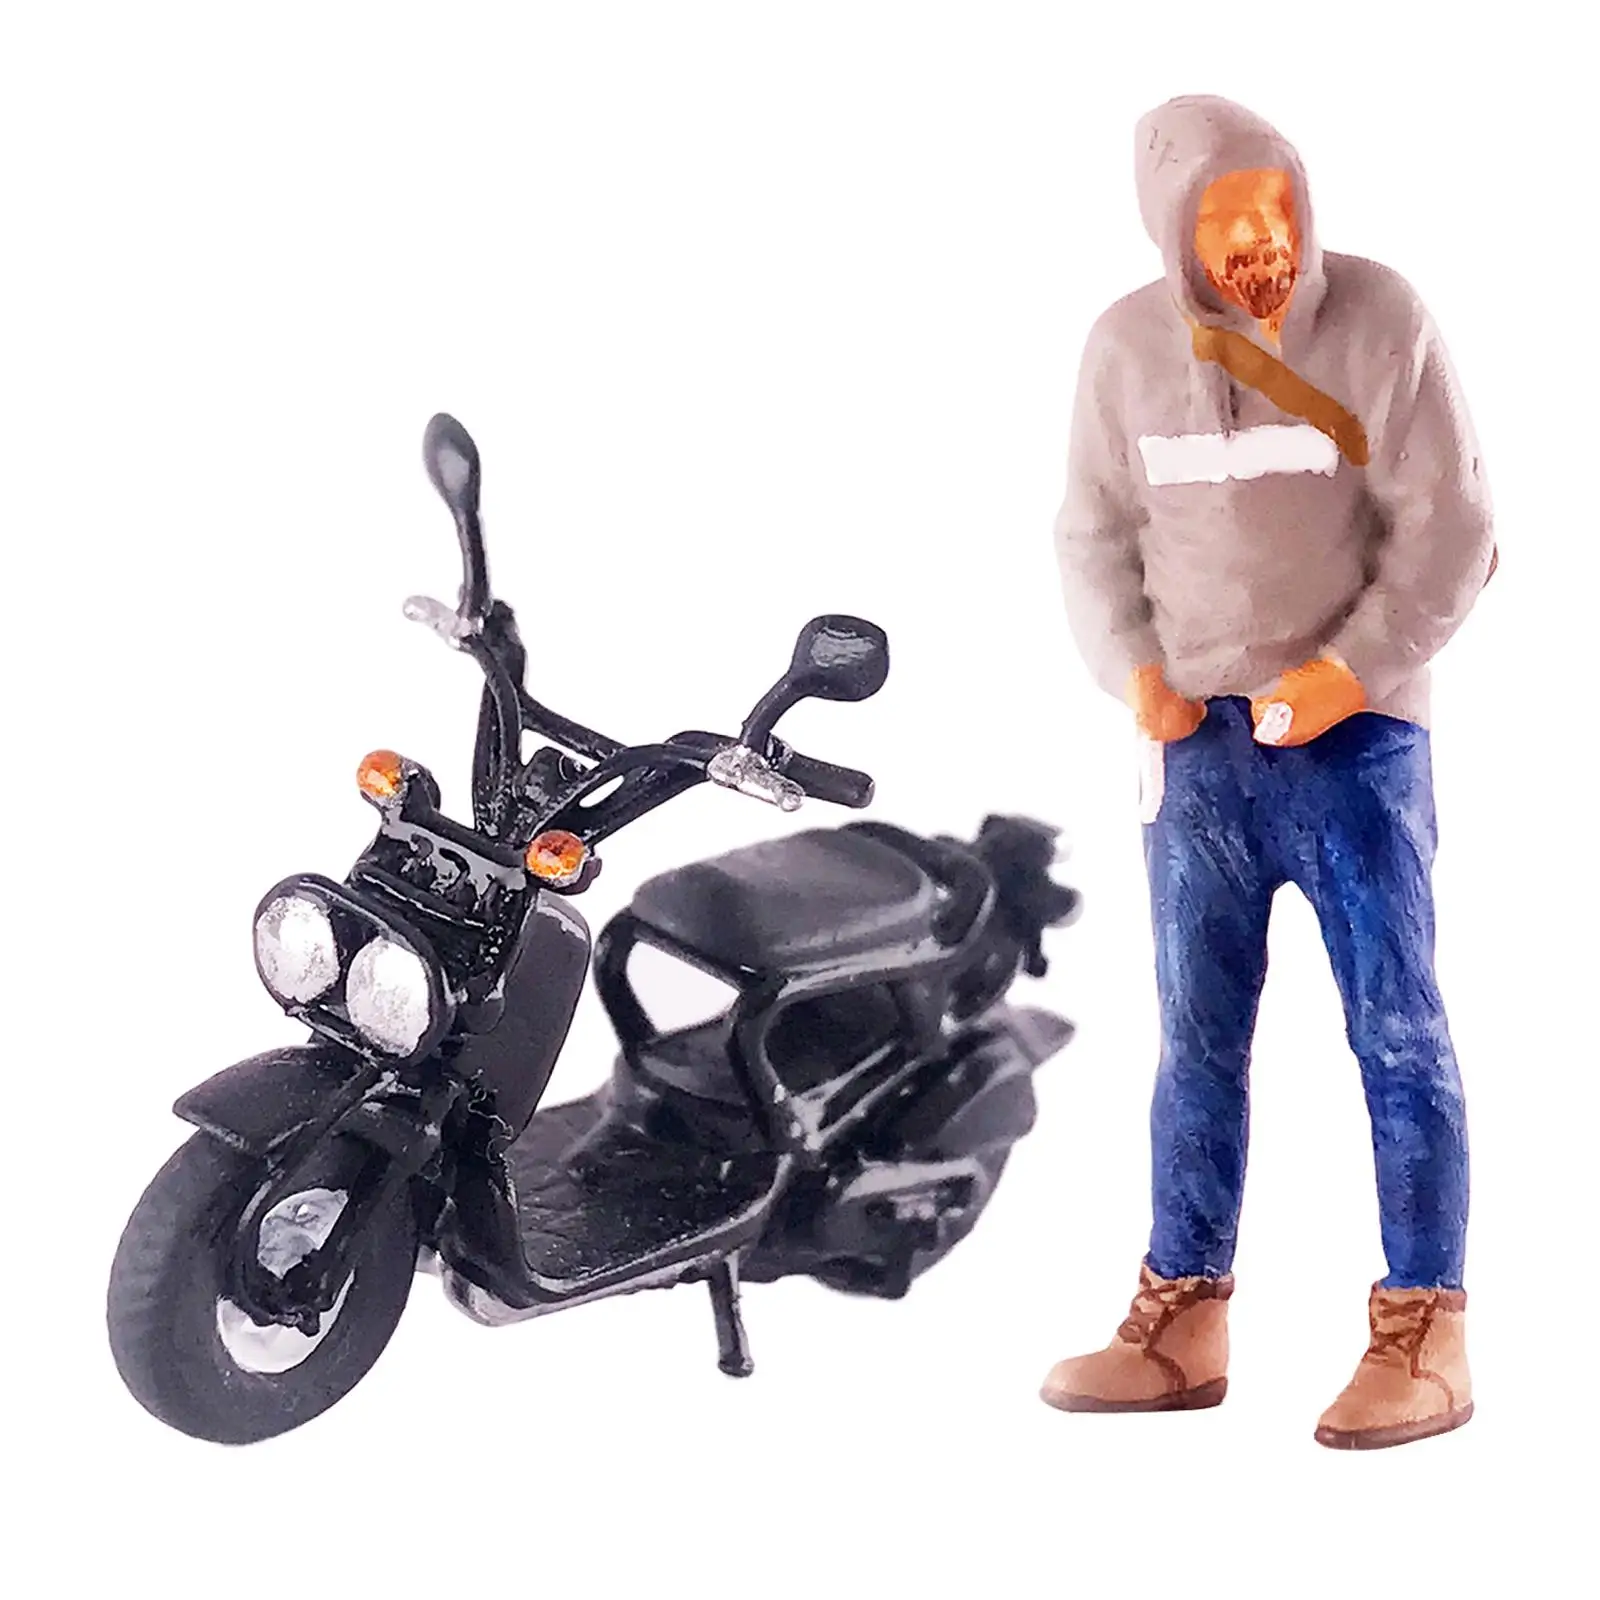 1/64 Male Figure Driving Motorcycle Tiny People Building Kit Layout S Scale